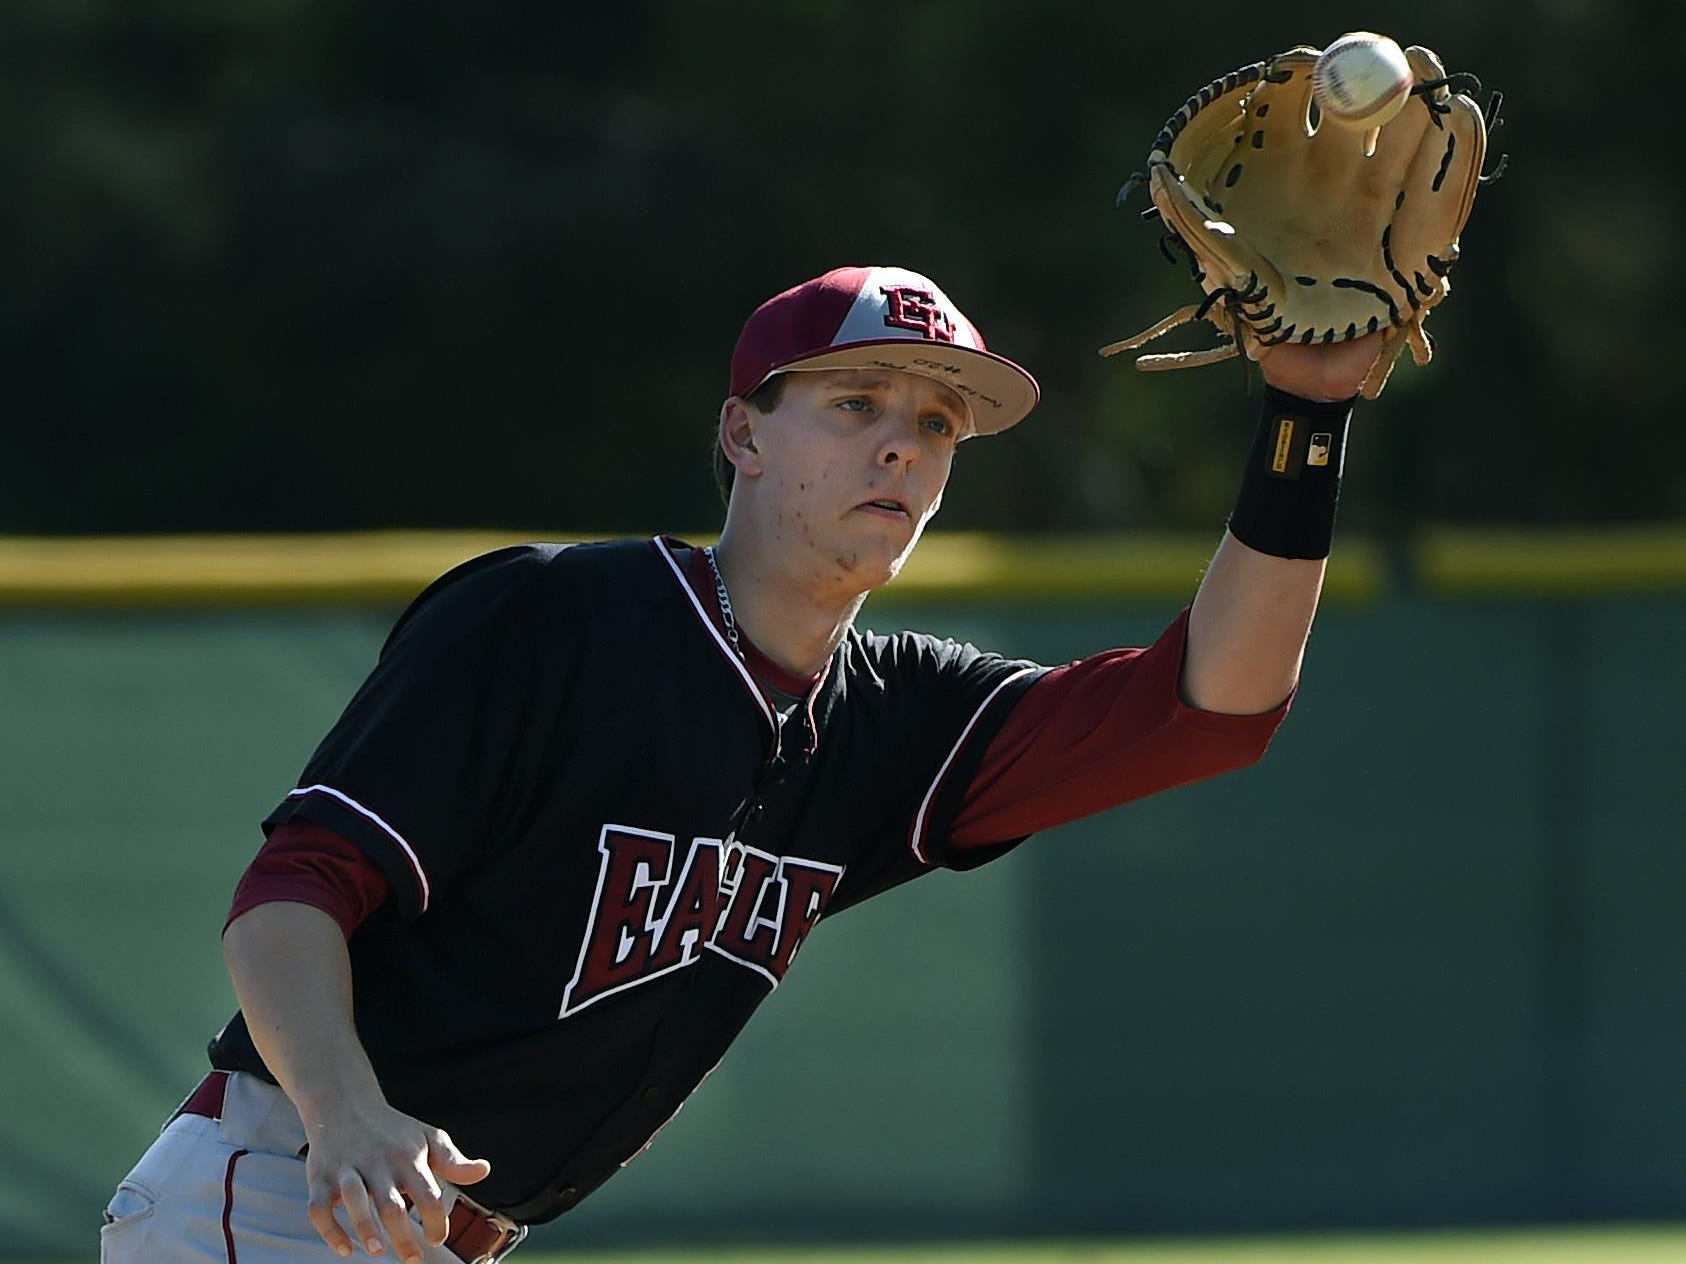 Ezell-Harding Christian School pitcher and third baseman, Grant Phillips warms up before a game baseball game on Thursday, April 28, 2016, in Nashville, Tenn. Wyse could not play as because of an ankle injury.